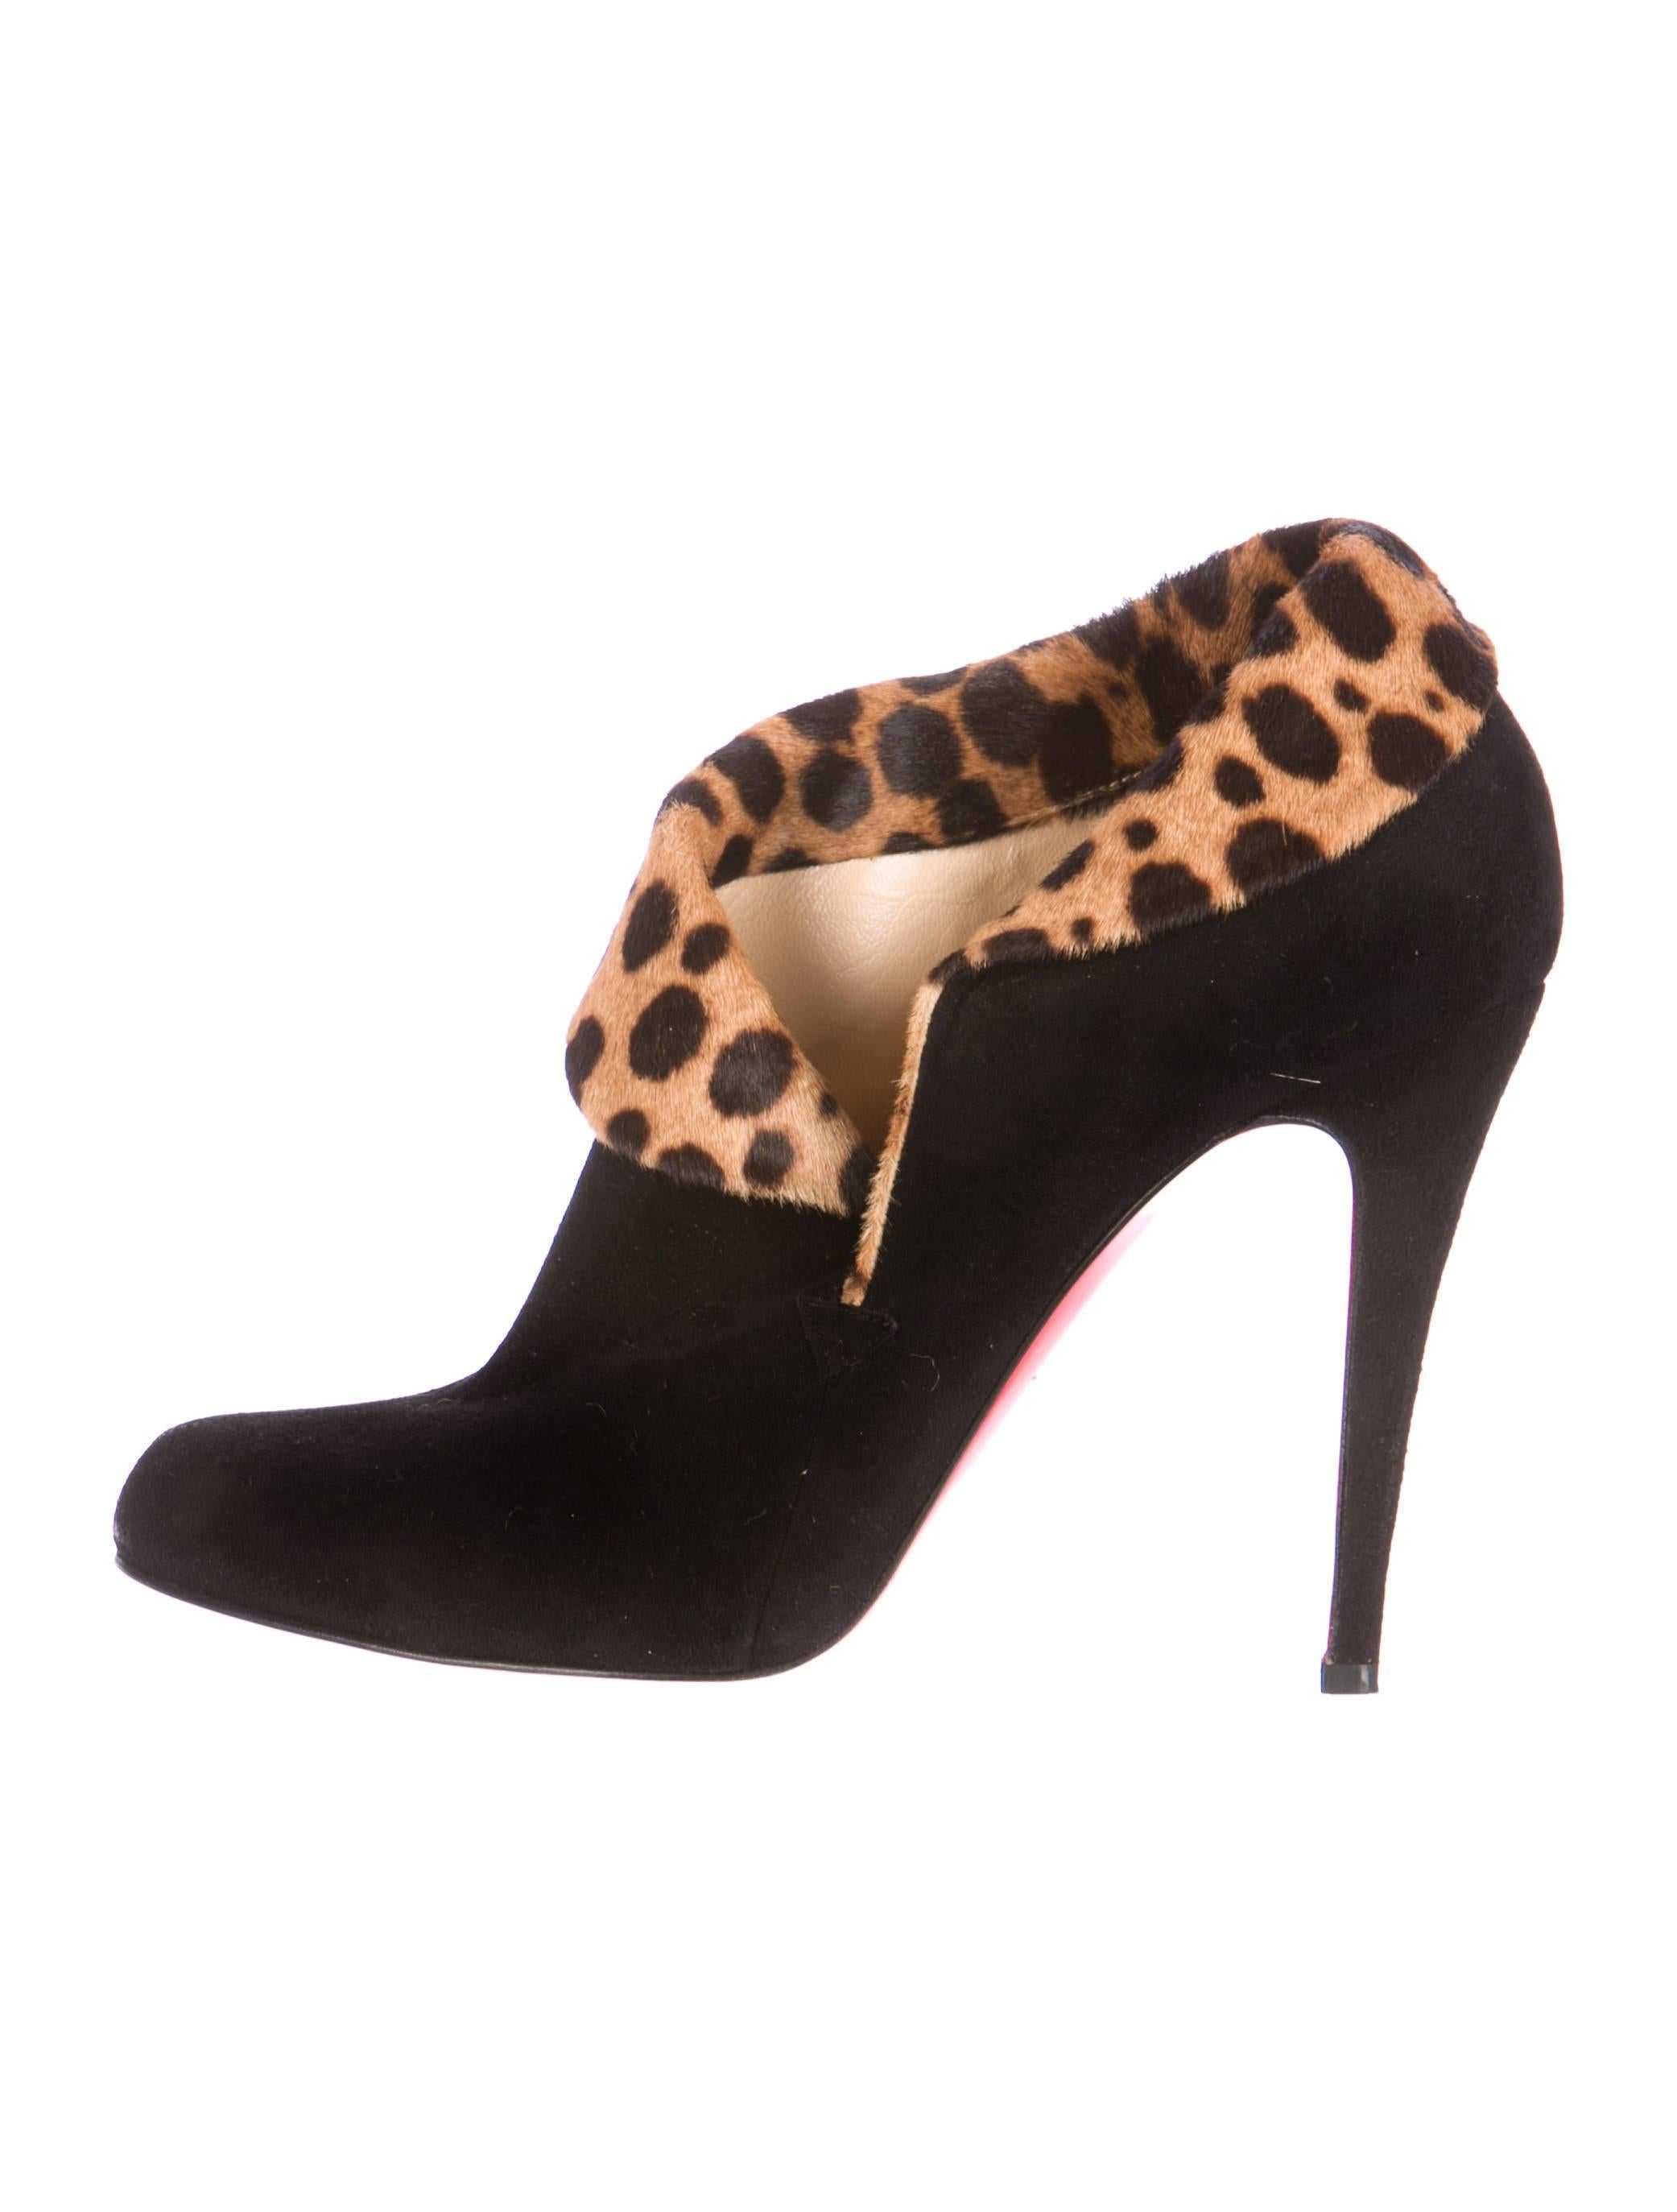 Black Christian Louboutin suede pointed-toe booties with leopard print calf hair trim and covered heels.

YOUR PURCHASE BENEFITS THOSE WHO ARE DEVELOPMENTALLY DISABLED.
